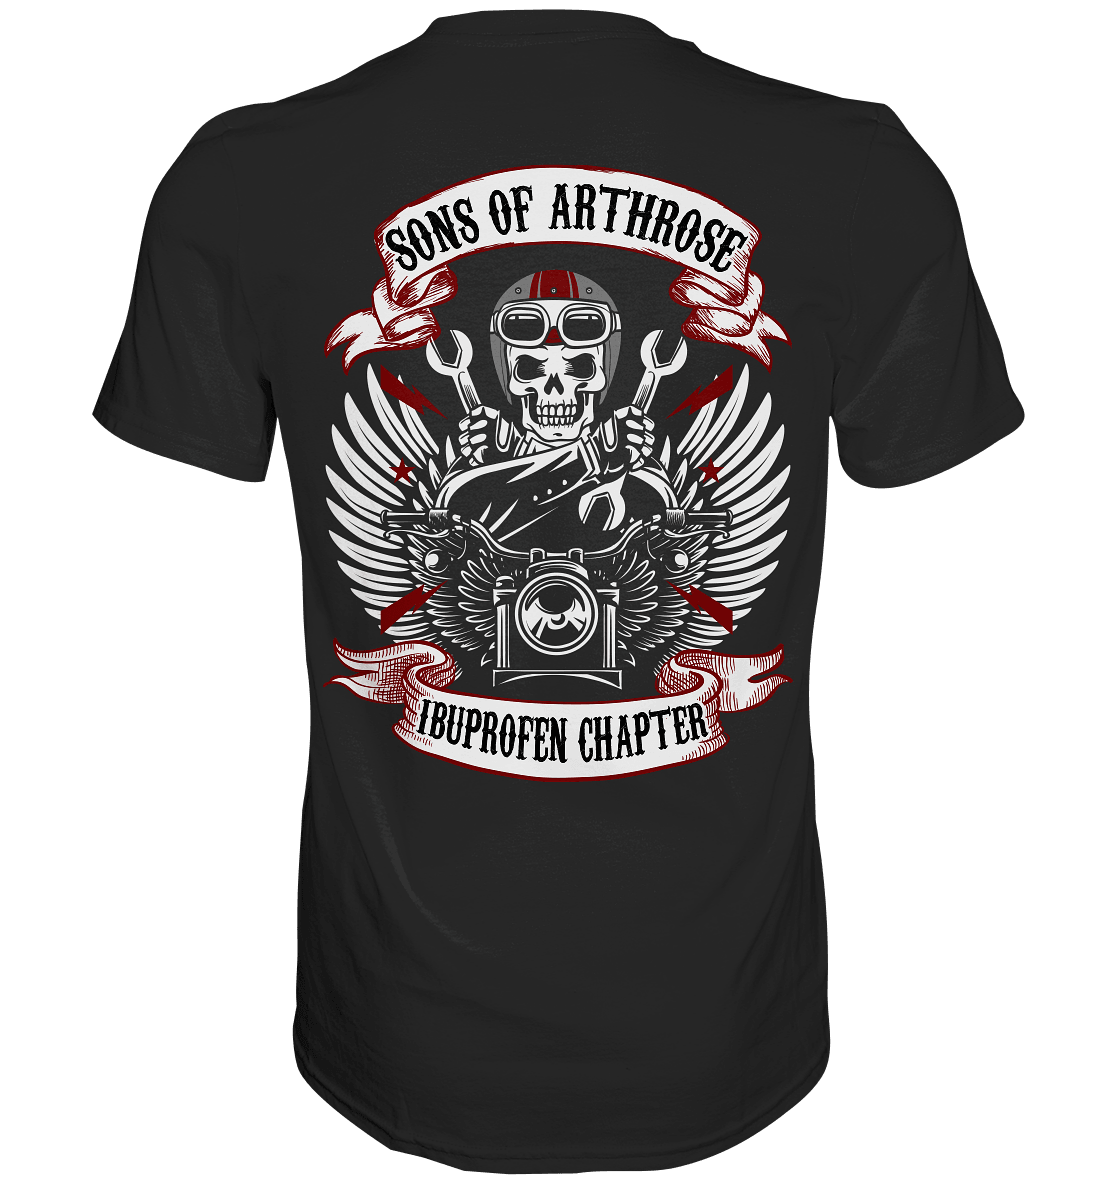 Sons of Arthrose - Backprint Shirt - Totally Wasted